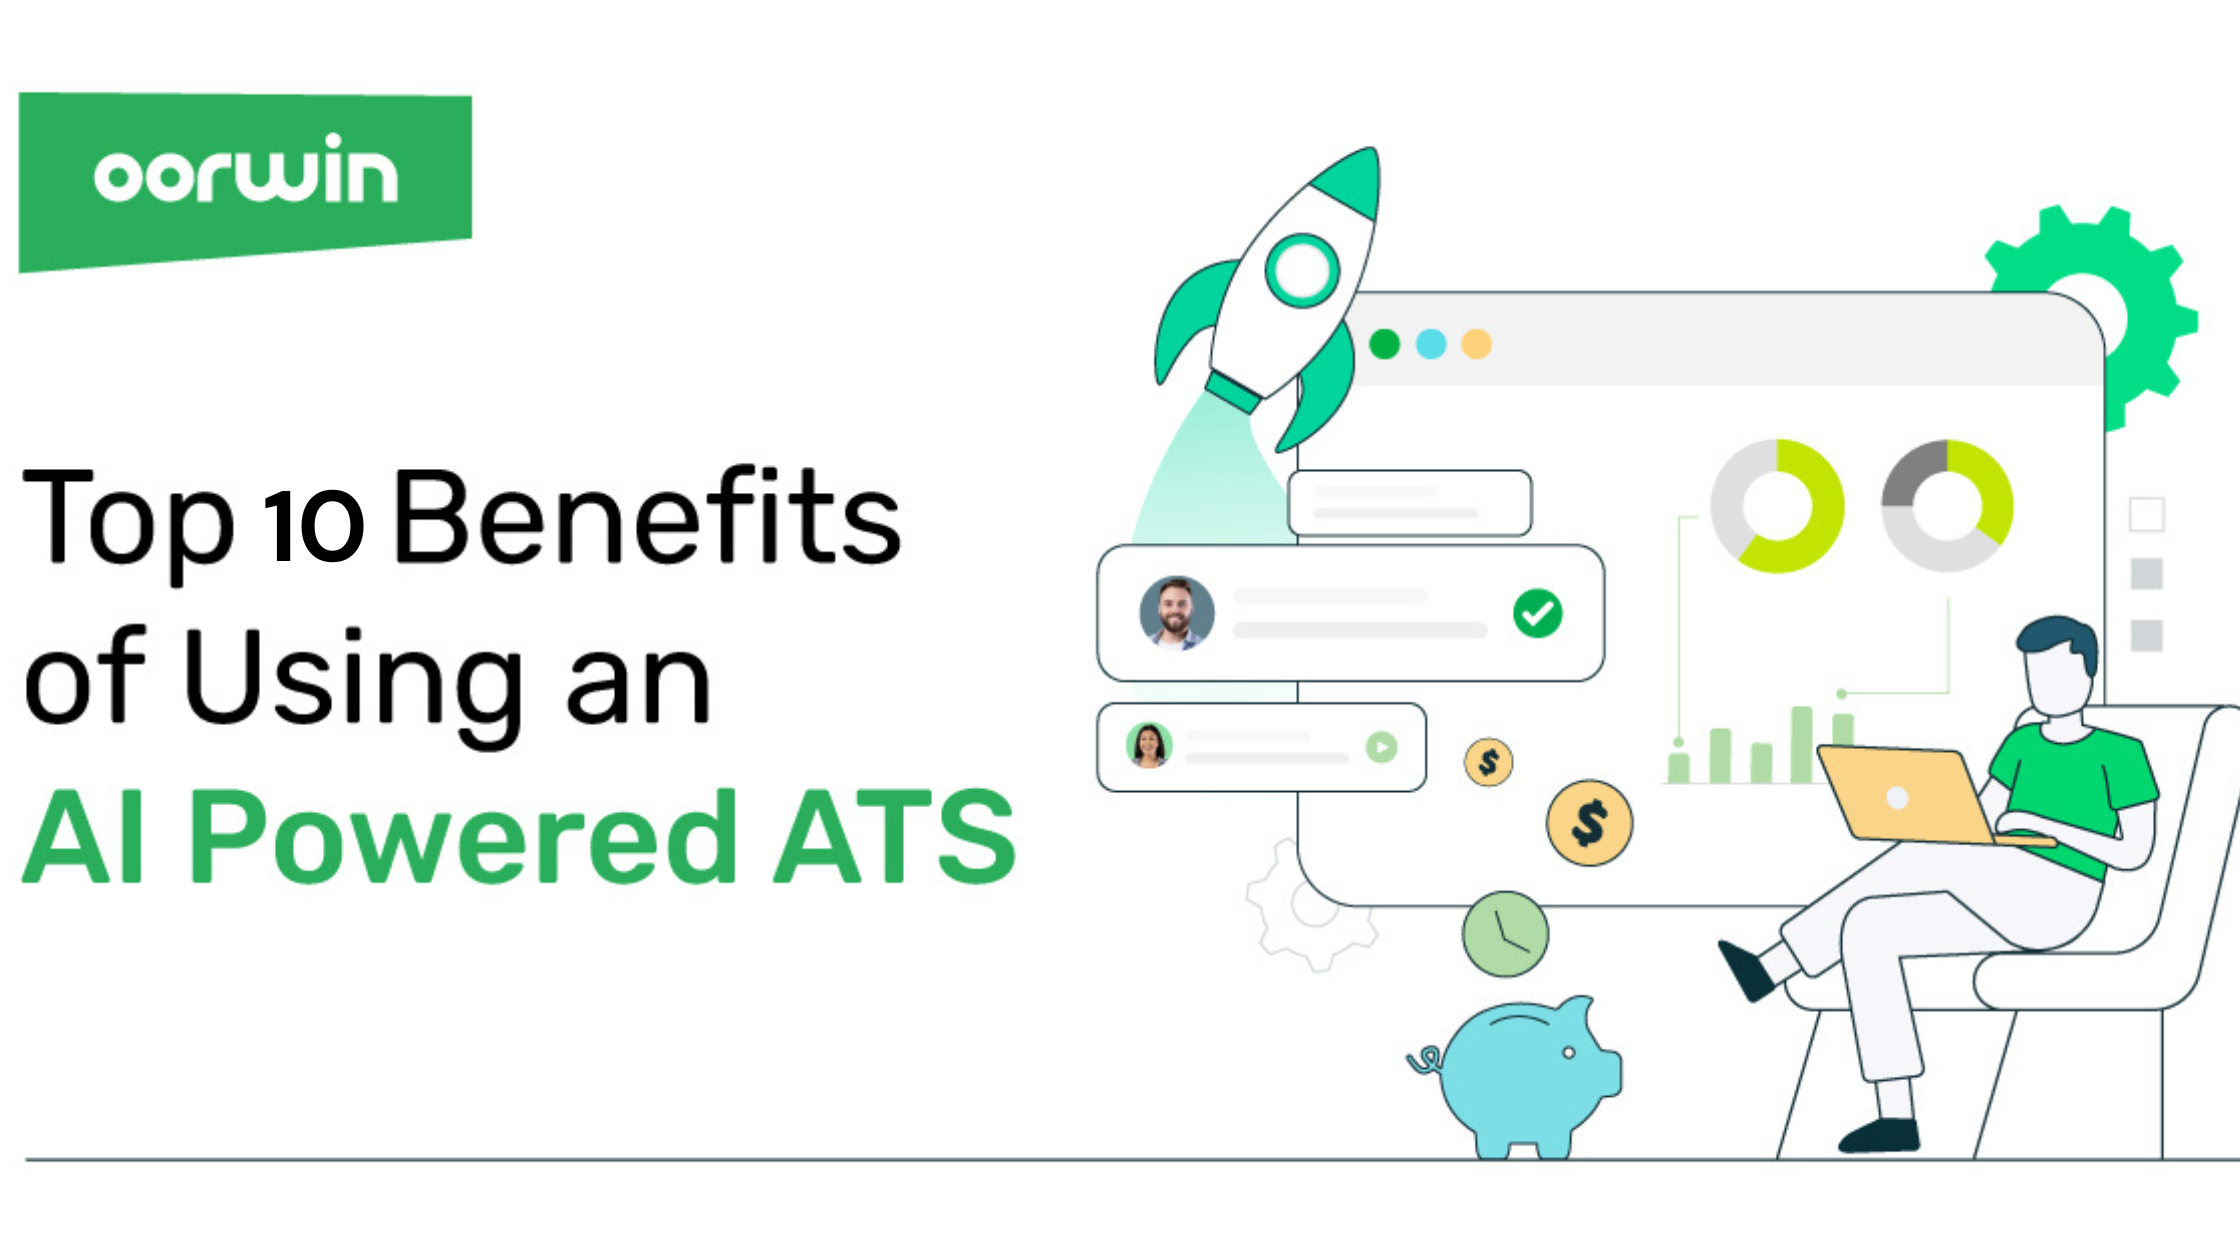 Benefits of an Applicant Tracking System for Recruiters